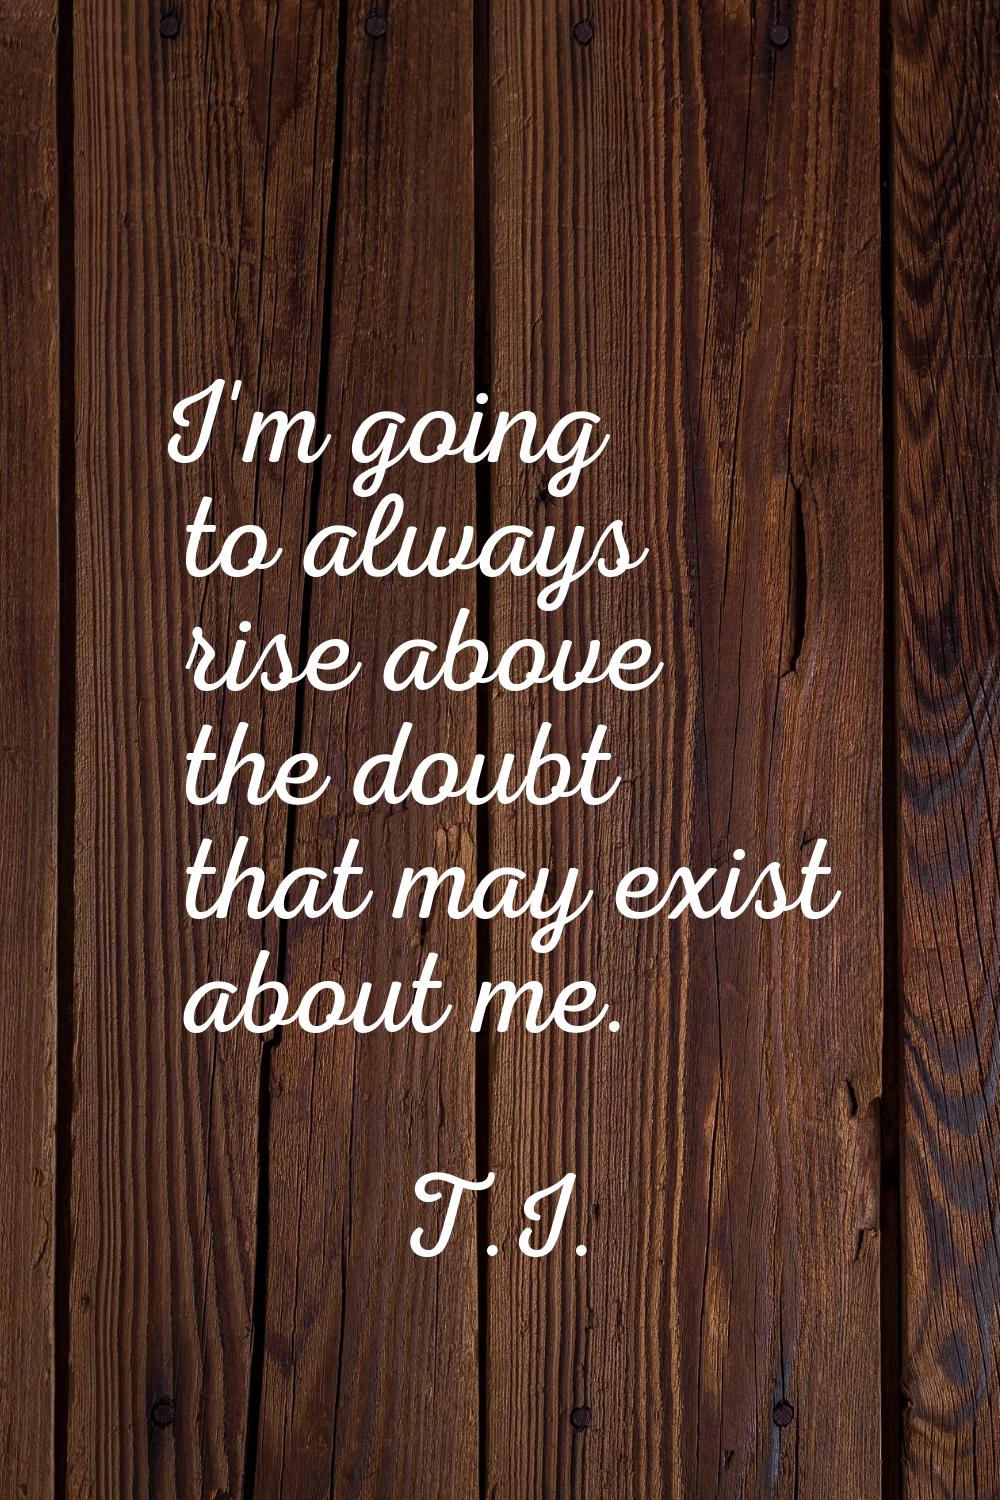 I'm going to always rise above the doubt that may exist about me.